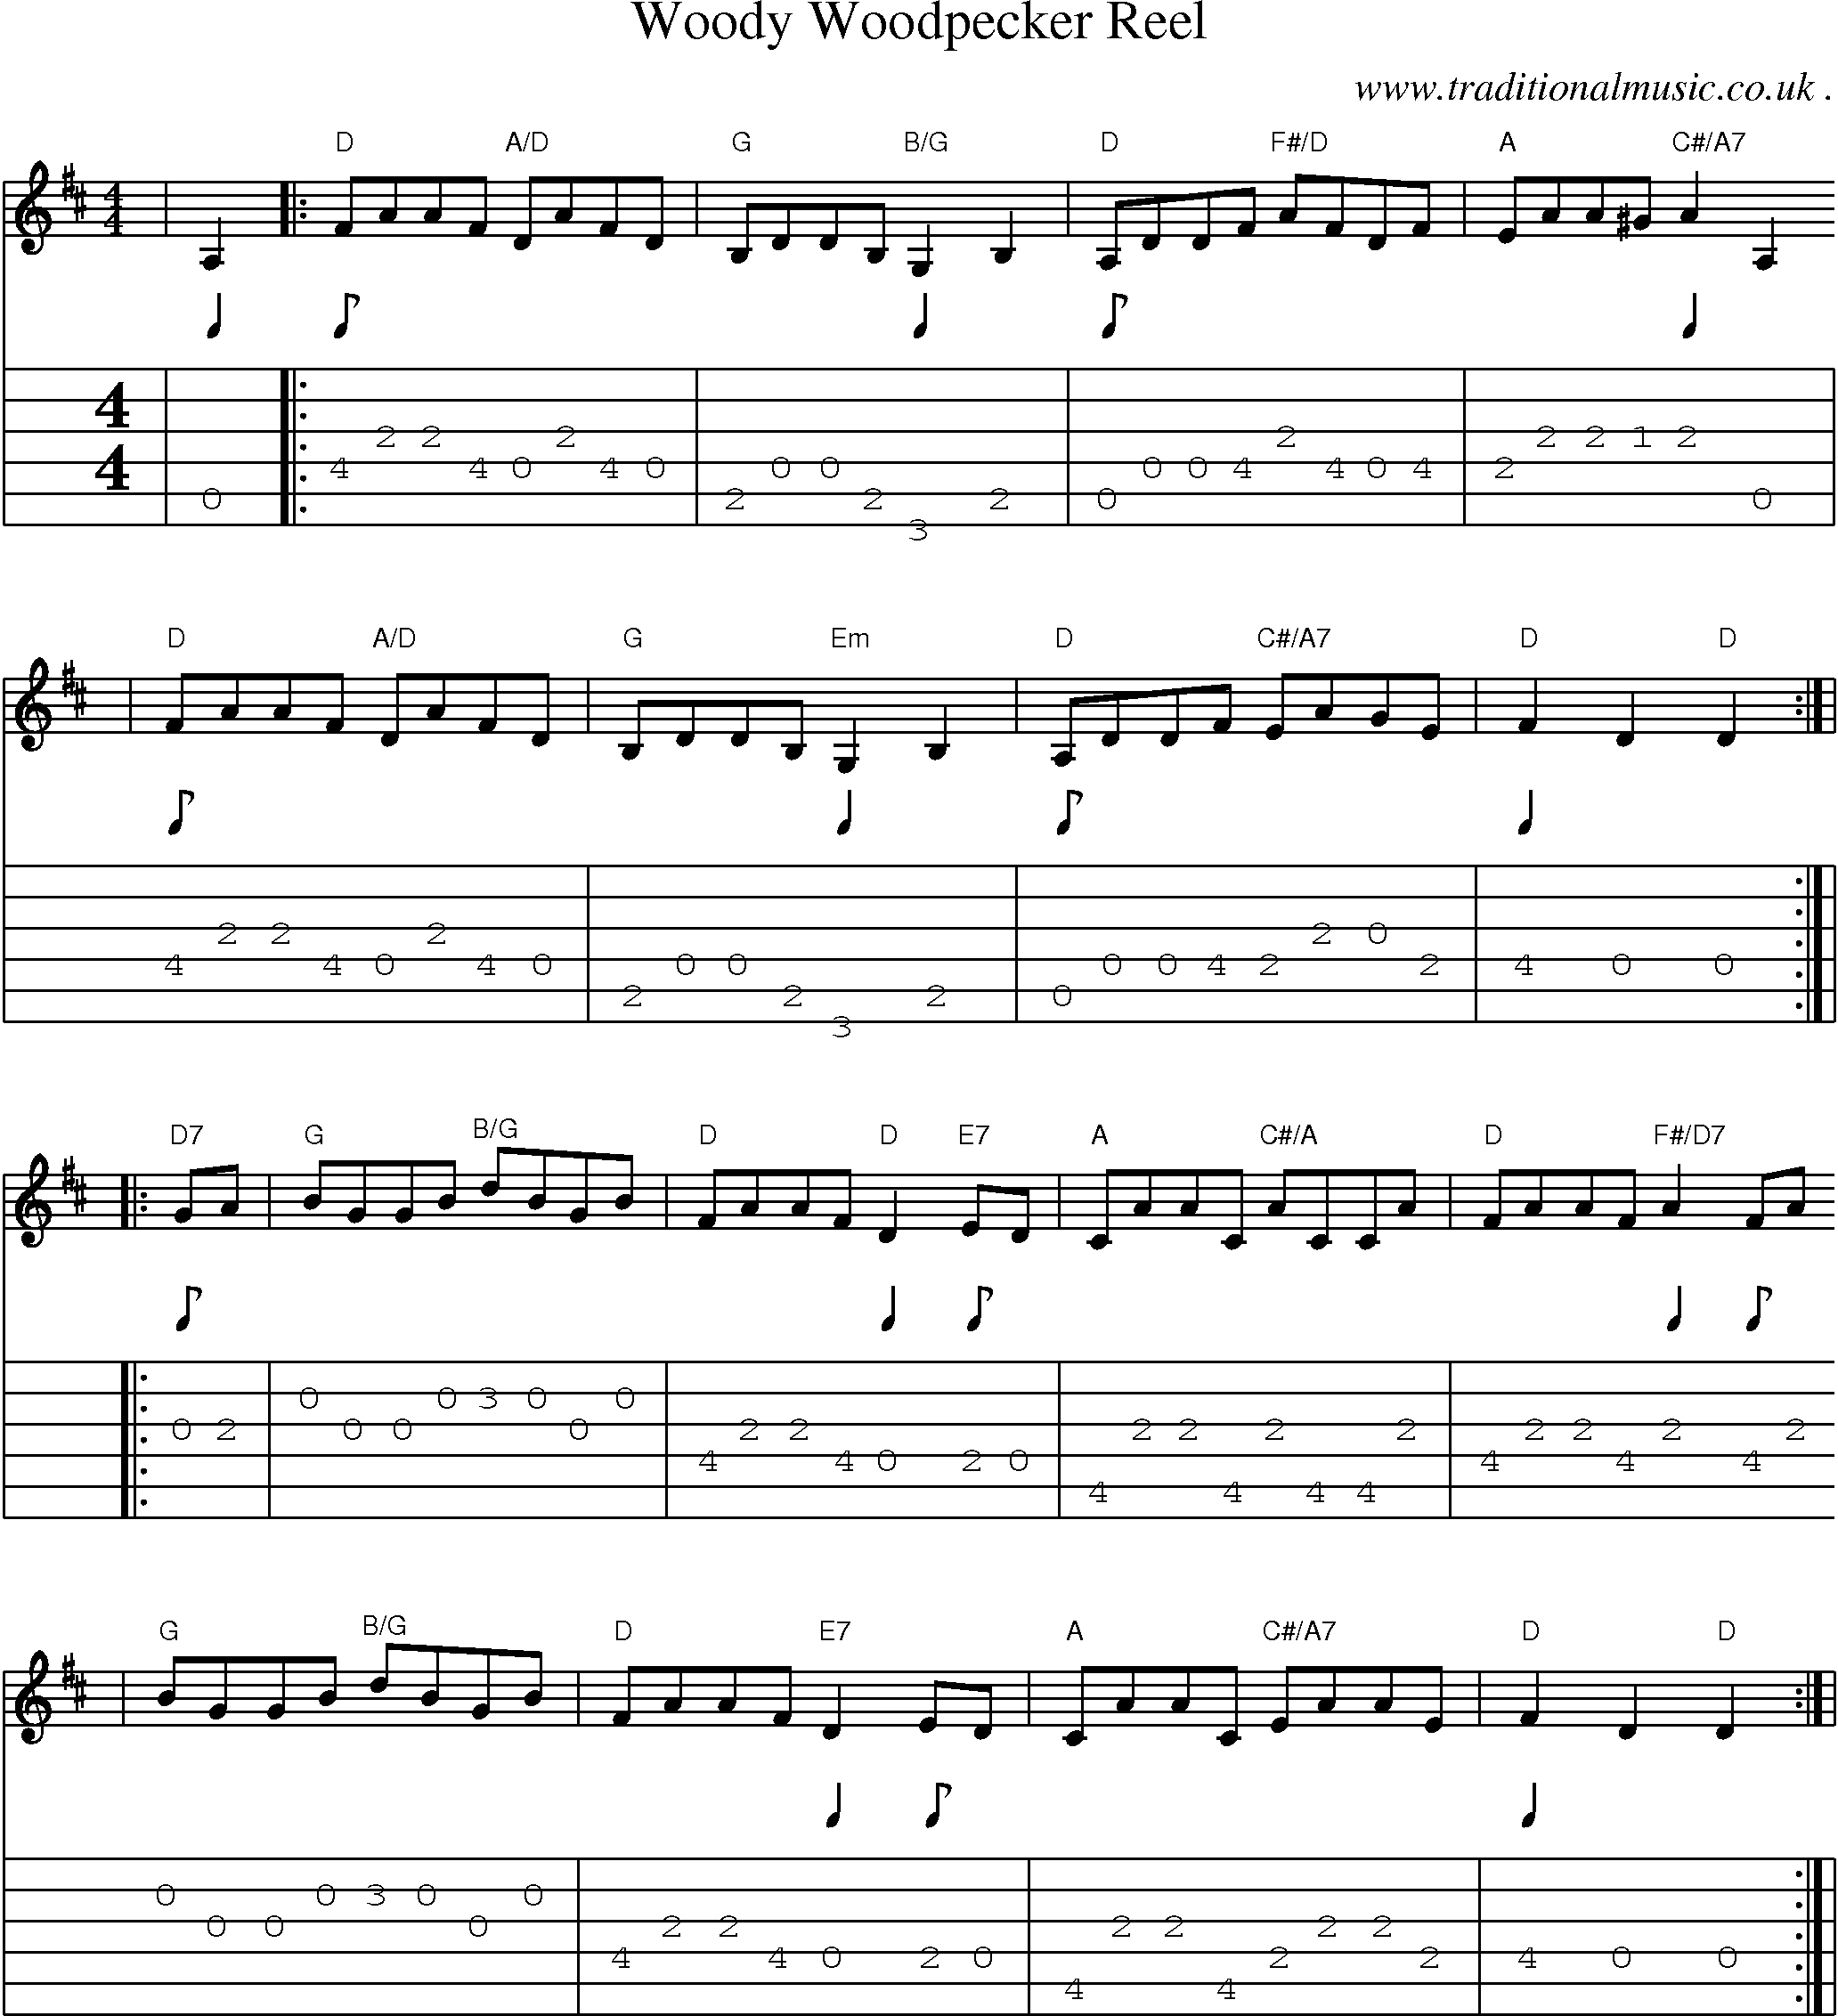 Music Score and Guitar Tabs for Woody Woodpecker Reel